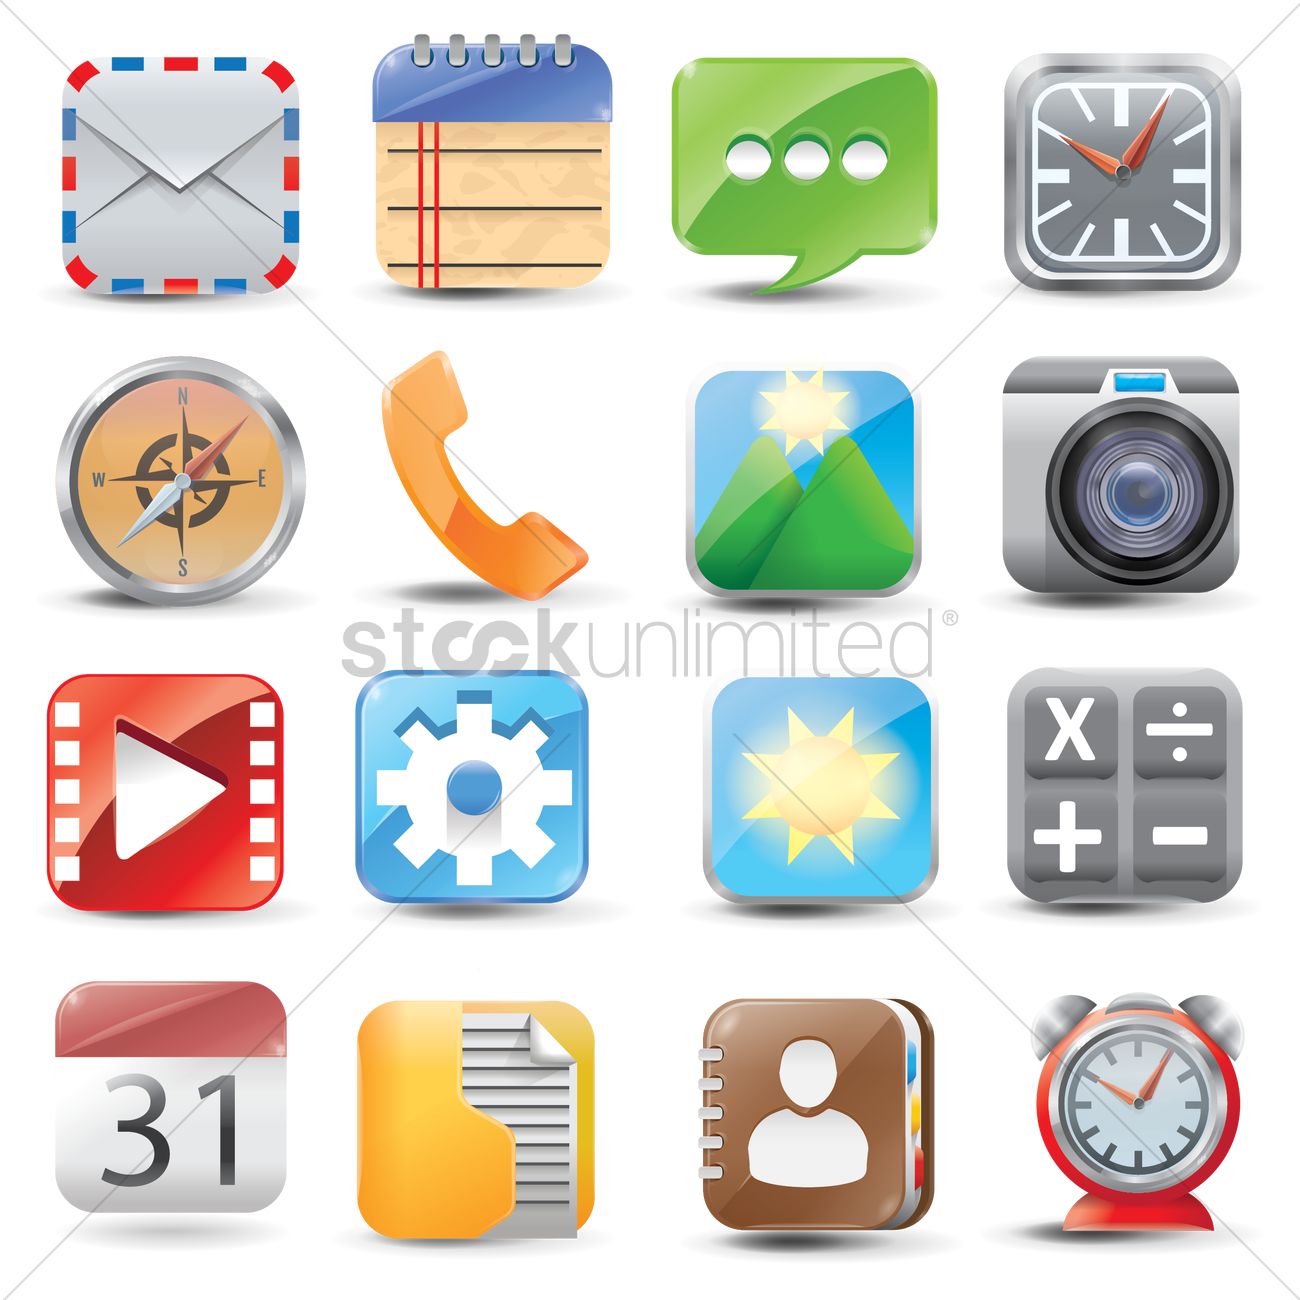 Mobile App Icon Application Emblems Isolated Stock Illustration 